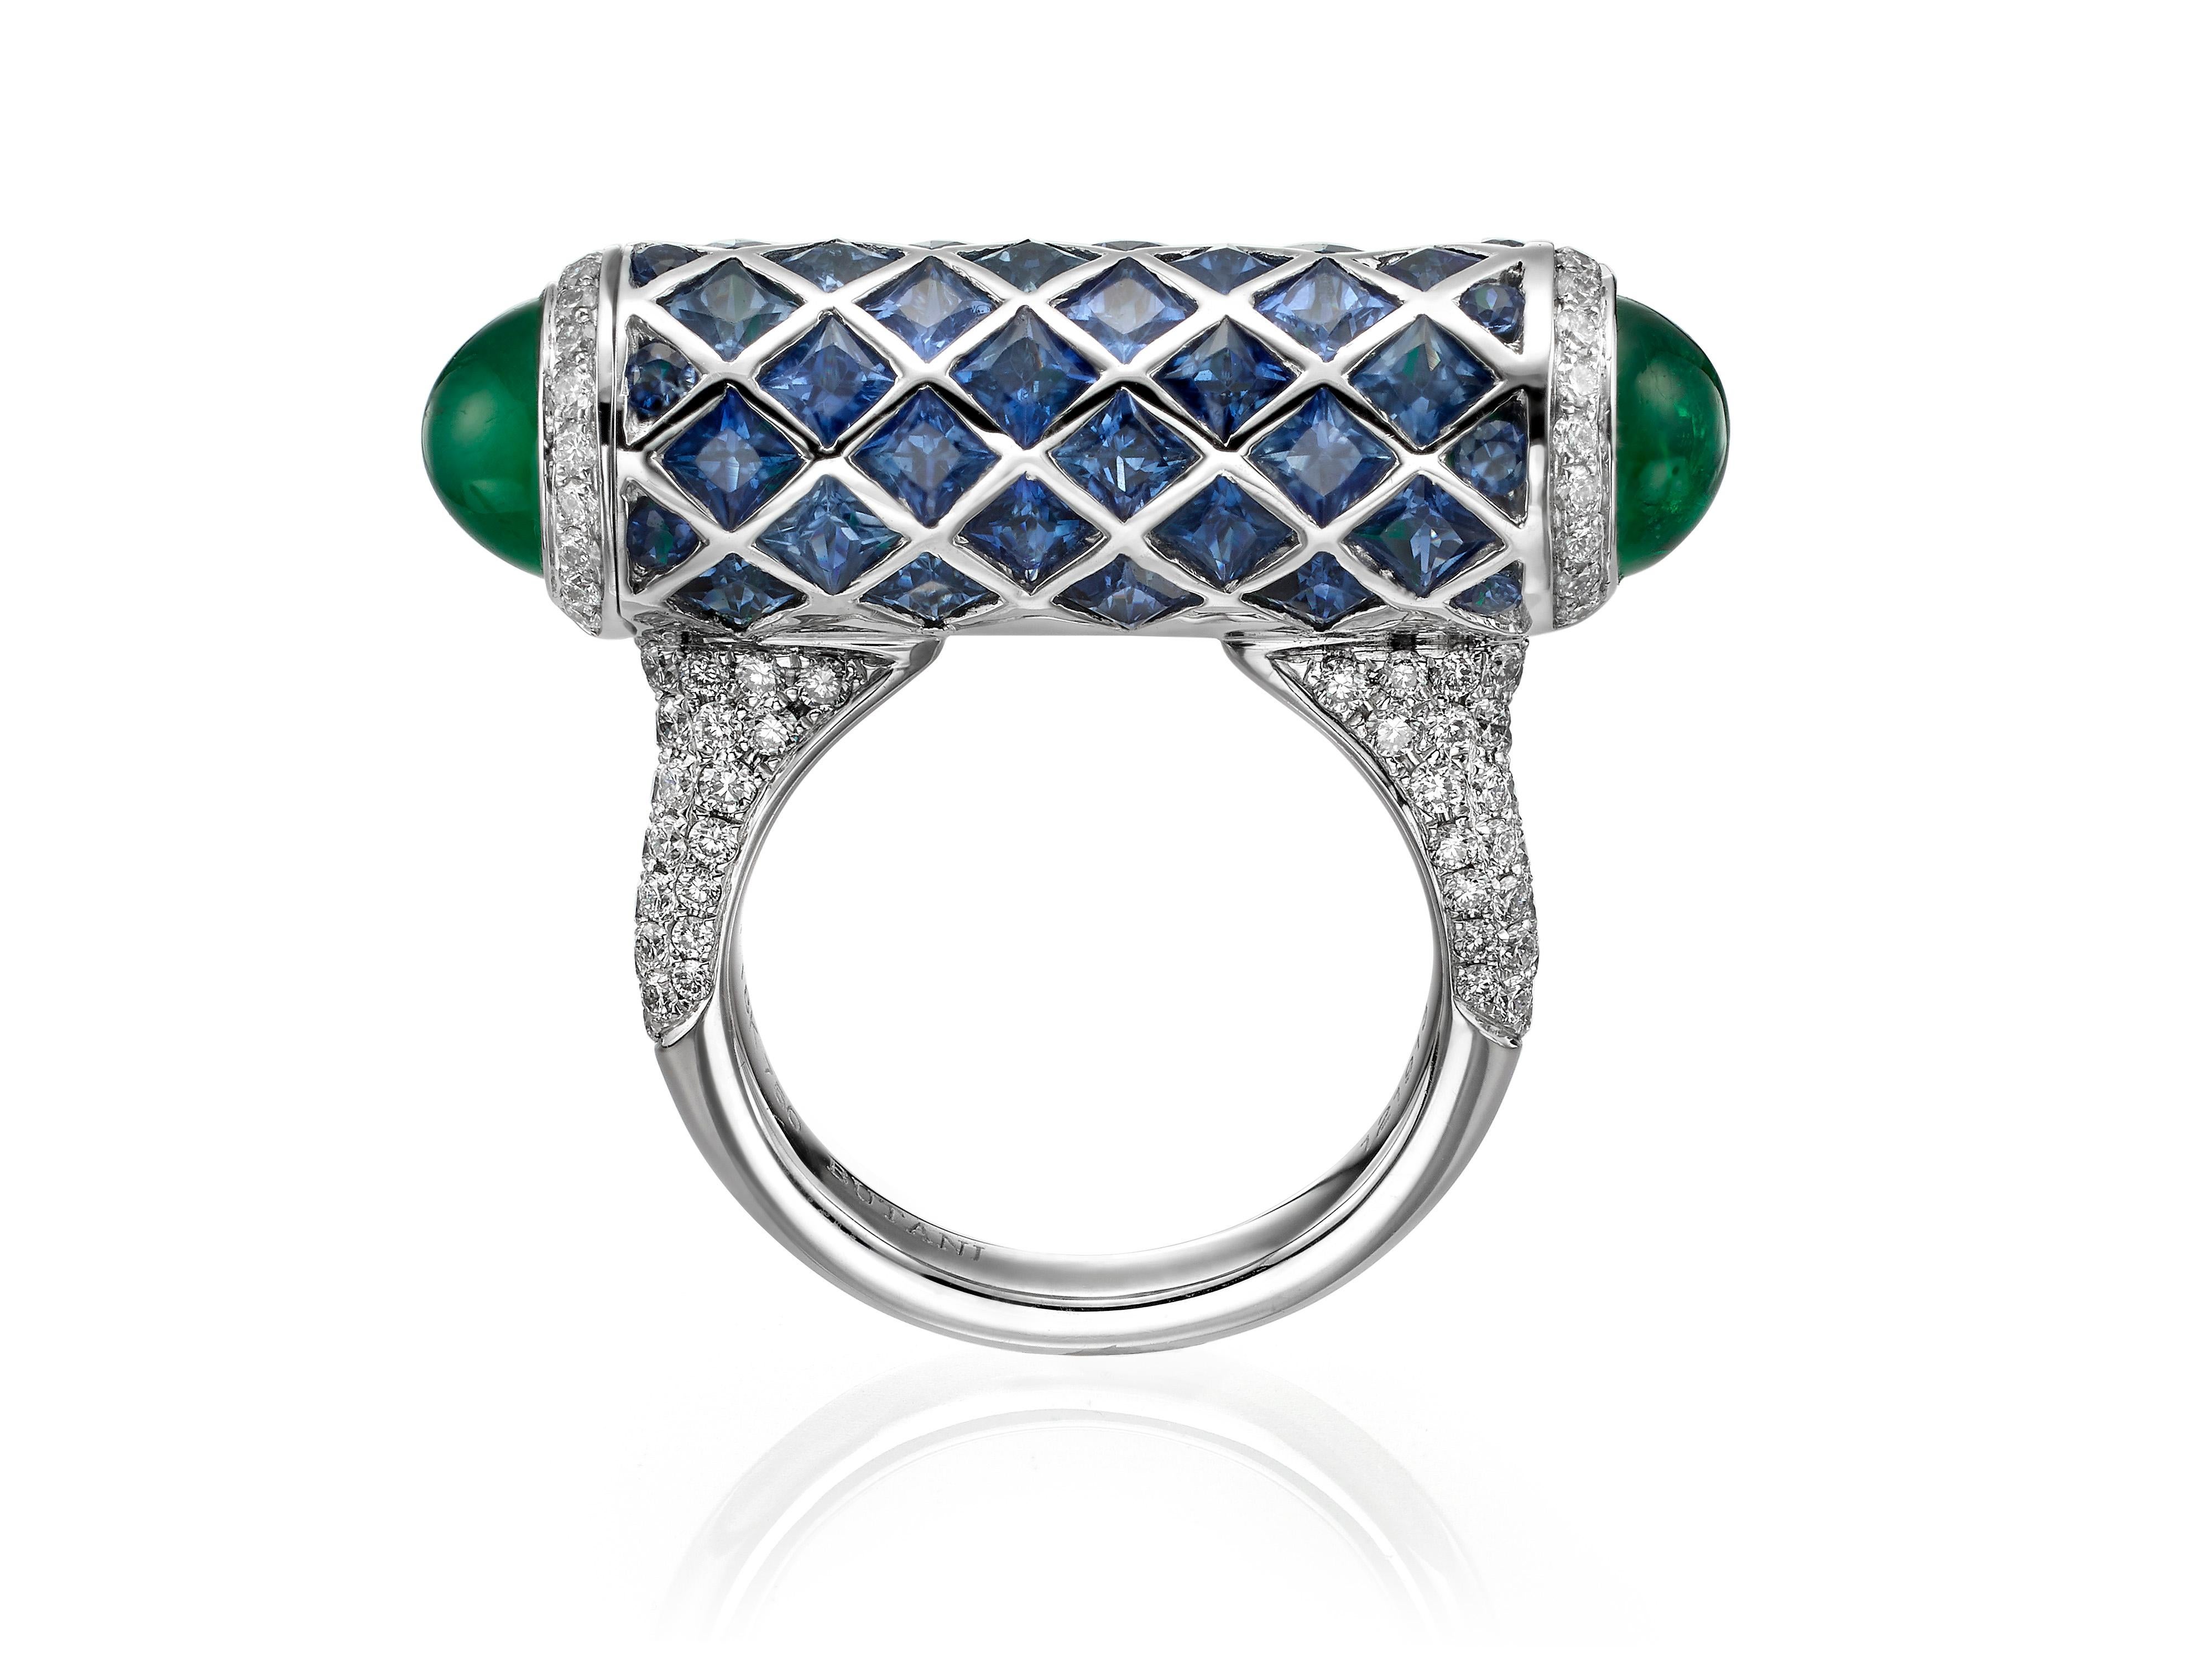 A one-of-a-kind secret compartment cocktail ring encrusted with 5.91 carats of royal blue sapphires and a brilliant lattice of 0.94 carats of white diamonds.  The ring is accented with two emerald cabochons (3.06 carats total) and hides a secret